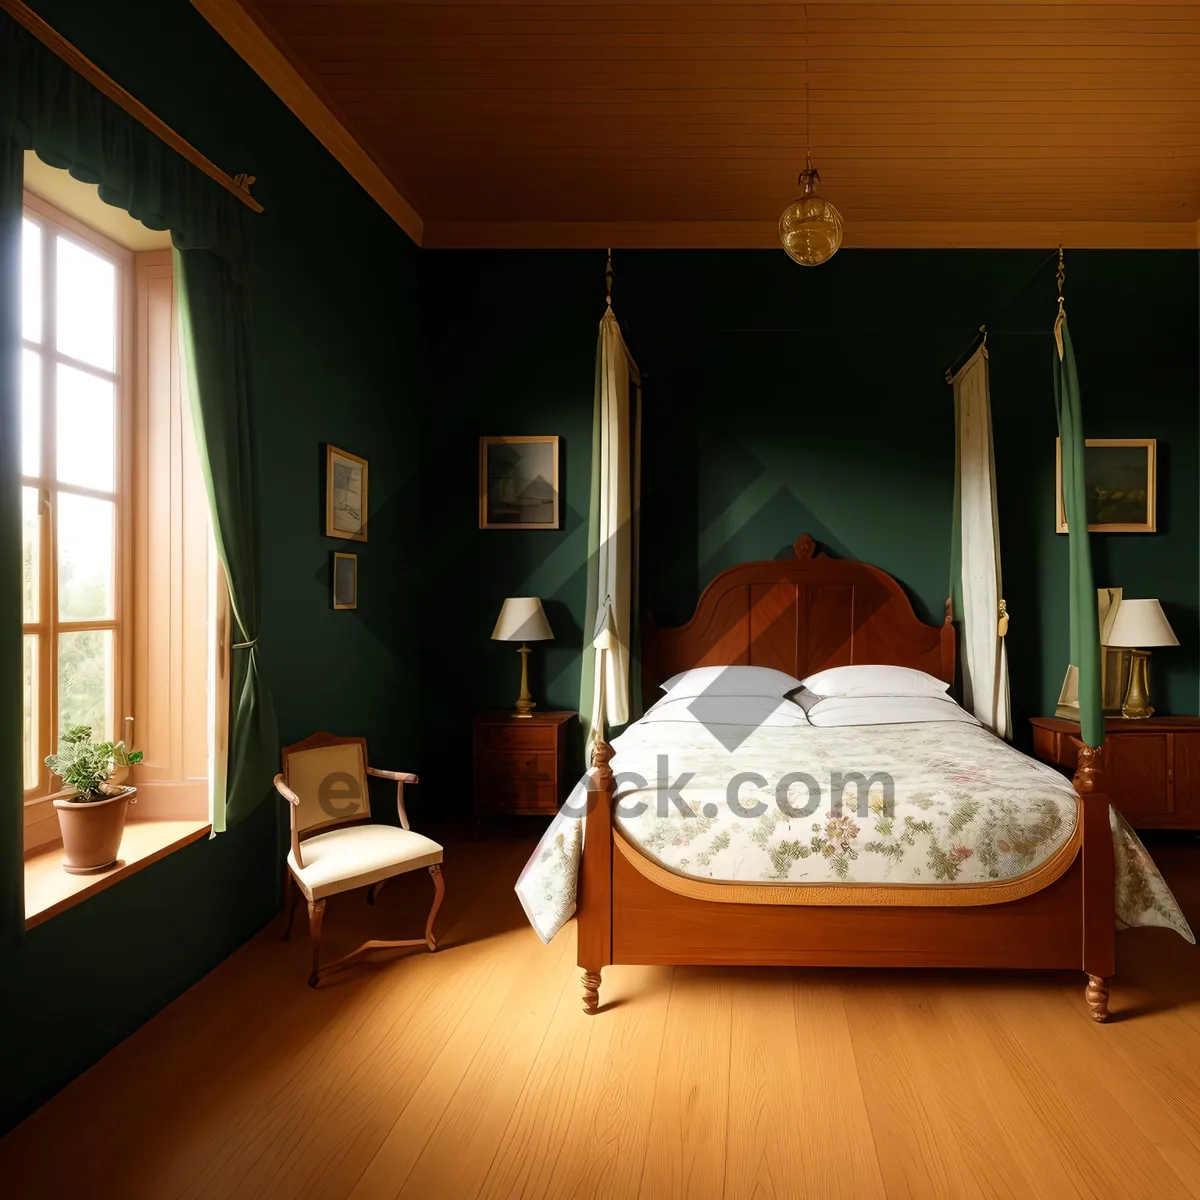 Picture of Modern Luxury Bedroom with Wood Furniture and Four-Poster Bed